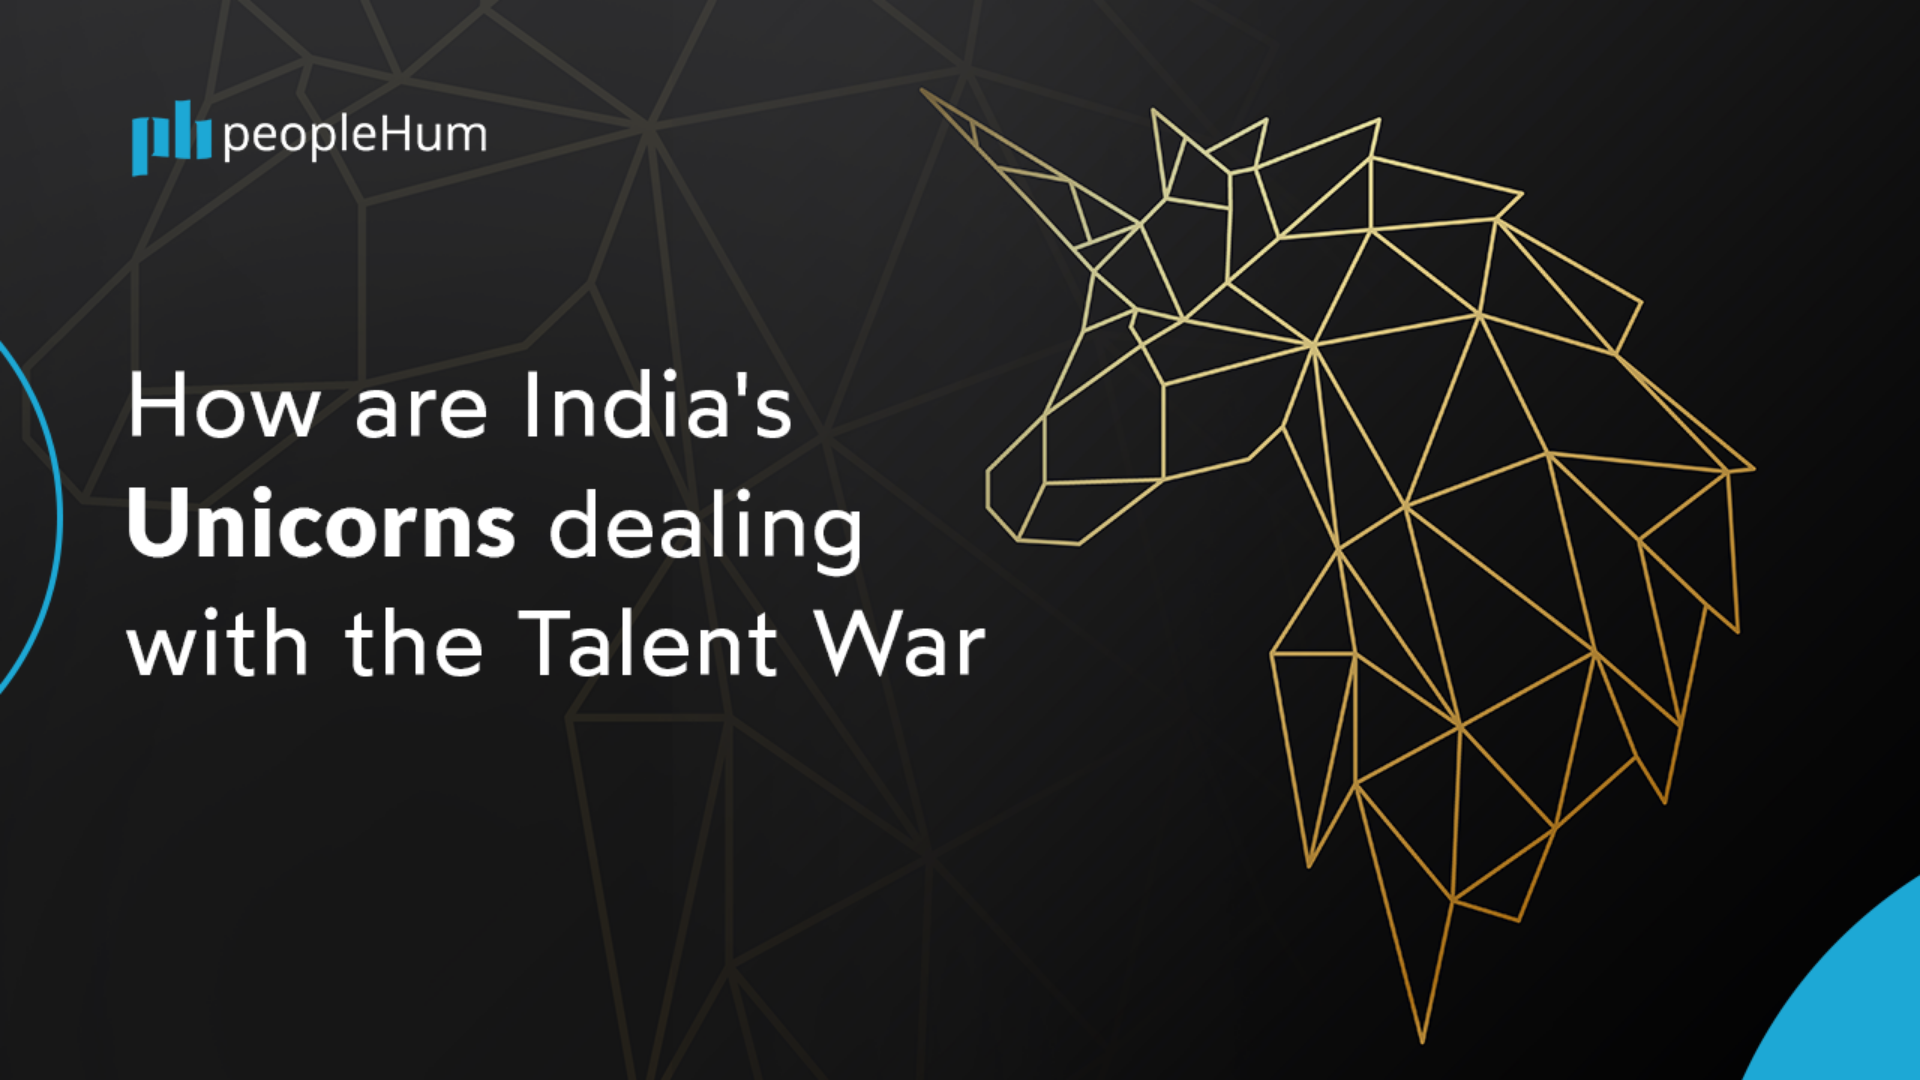 How are India's Unicorns dealing with the Talent War